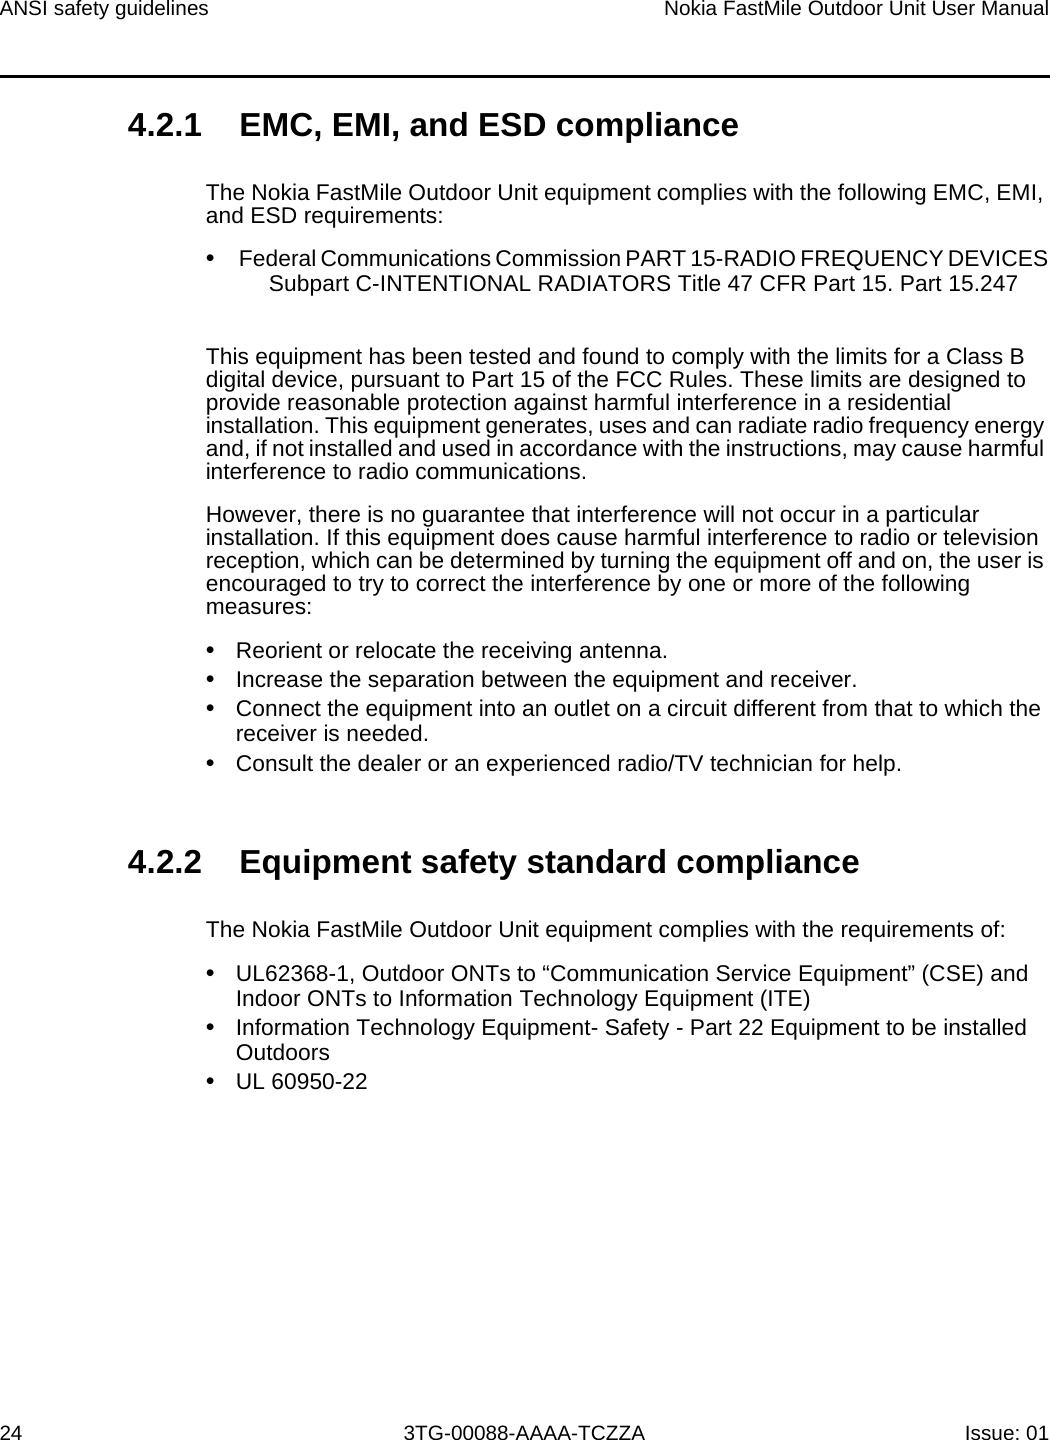 ANSI safety guidelines24Nokia FastMile Outdoor Unit User Manual3TG-00088-AAAA-TCZZA Issue: 014.2.1 EMC, EMI, and ESD complianceThe Nokia FastMile Outdoor Unit equipment complies with the following EMC, EMI, and ESD requirements: •Federal Communications Commission PART 15-RADIO FREQUENCY DEVICES Subpart C-INTENTIONAL RADIATORS Title 47 CFR Part 15. Part 15.247This equipment has been tested and found to comply with the limits for a Class B digital device, pursuant to Part 15 of the FCC Rules. These limits are designed to provide reasonable protection against harmful interference in a residential installation. This equipment generates, uses and can radiate radio frequency energy and, if not installed and used in accordance with the instructions, may cause harmful interference to radio communications.However, there is no guarantee that interference will not occur in a particular installation. If this equipment does cause harmful interference to radio or television reception, which can be determined by turning the equipment off and on, the user is encouraged to try to correct the interference by one or more of the following measures:•Reorient or relocate the receiving antenna.•Increase the separation between the equipment and receiver.•Connect the equipment into an outlet on a circuit different from that to which thereceiver is needed.•Consult the dealer or an experienced radio/TV technician for help.4.2.2 Equipment safety standard complianceThe Nokia FastMile Outdoor Unit equipment complies with the requirements of: •UL62368-1, Outdoor ONTs to “Communication Service Equipment” (CSE) andIndoor ONTs to Information Technology Equipment (ITE)•Information Technology Equipment- Safety - Part 22 Equipment to be installedOutdoors•UL 60950-22